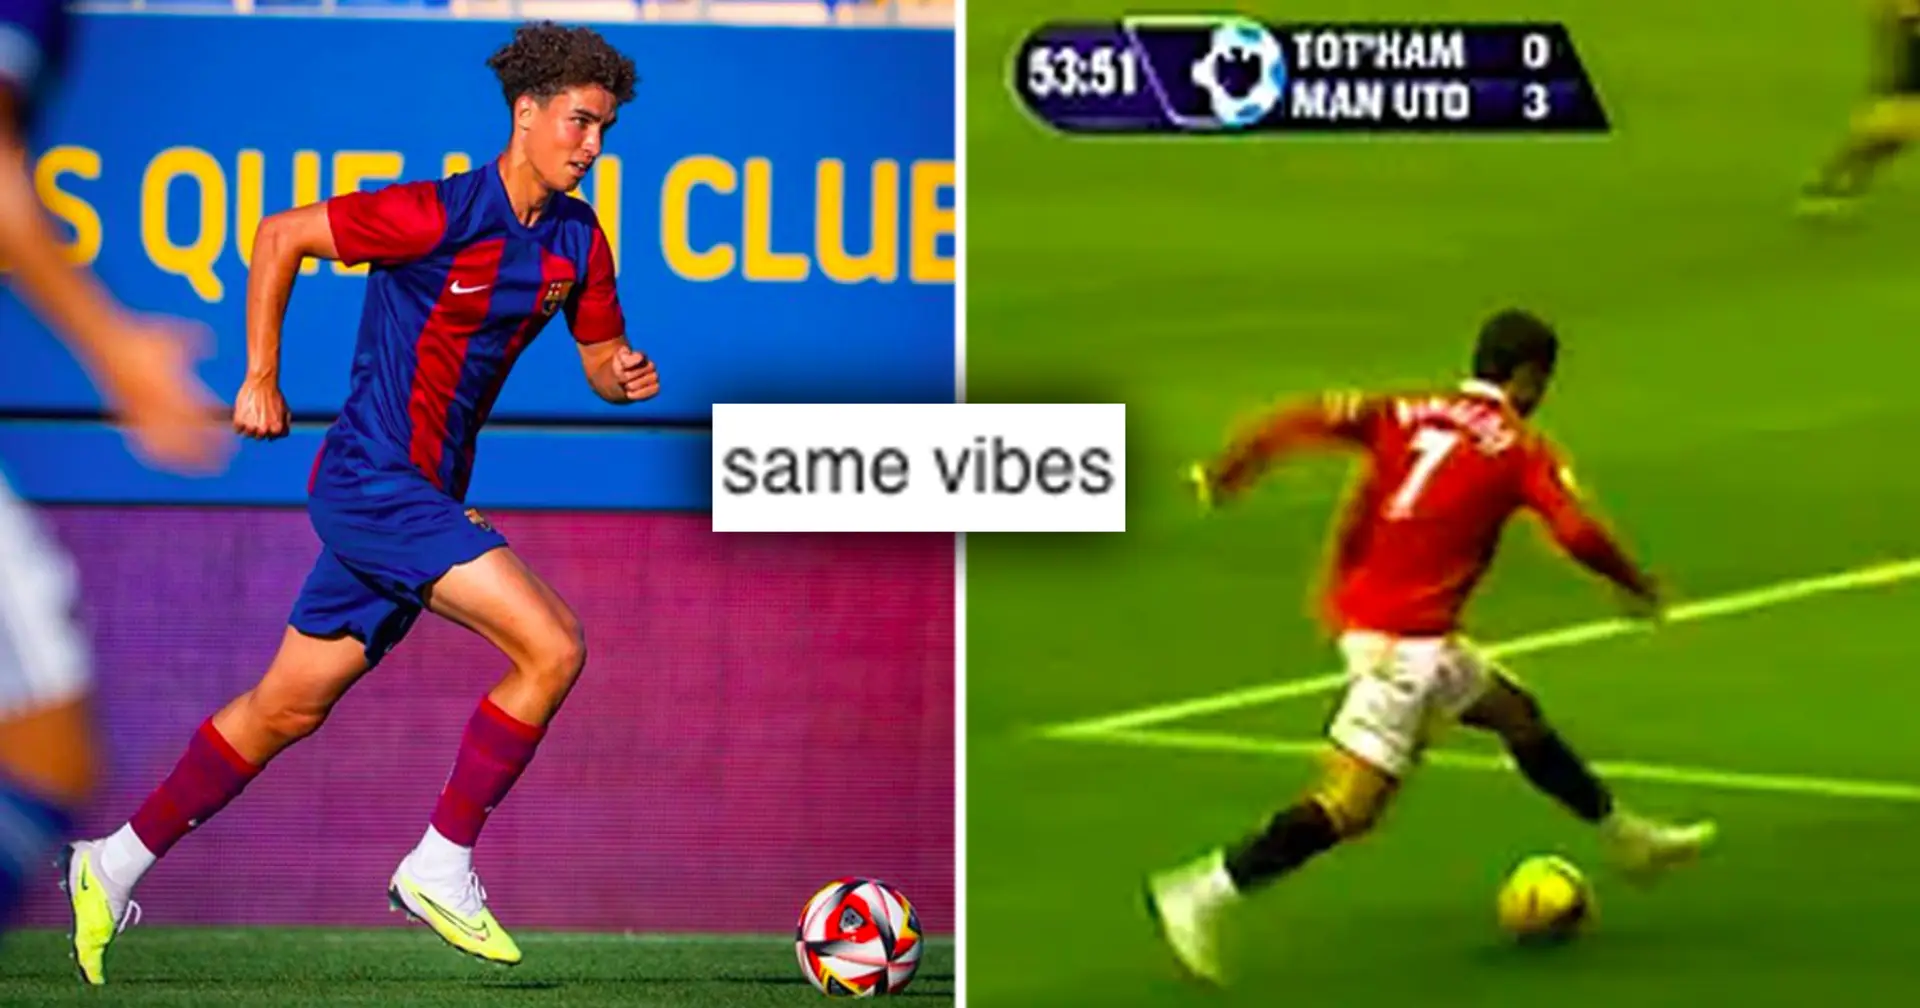 How did Barca's wonderkid who looks like Cristiano Ronaldo fare on his debut? Answered